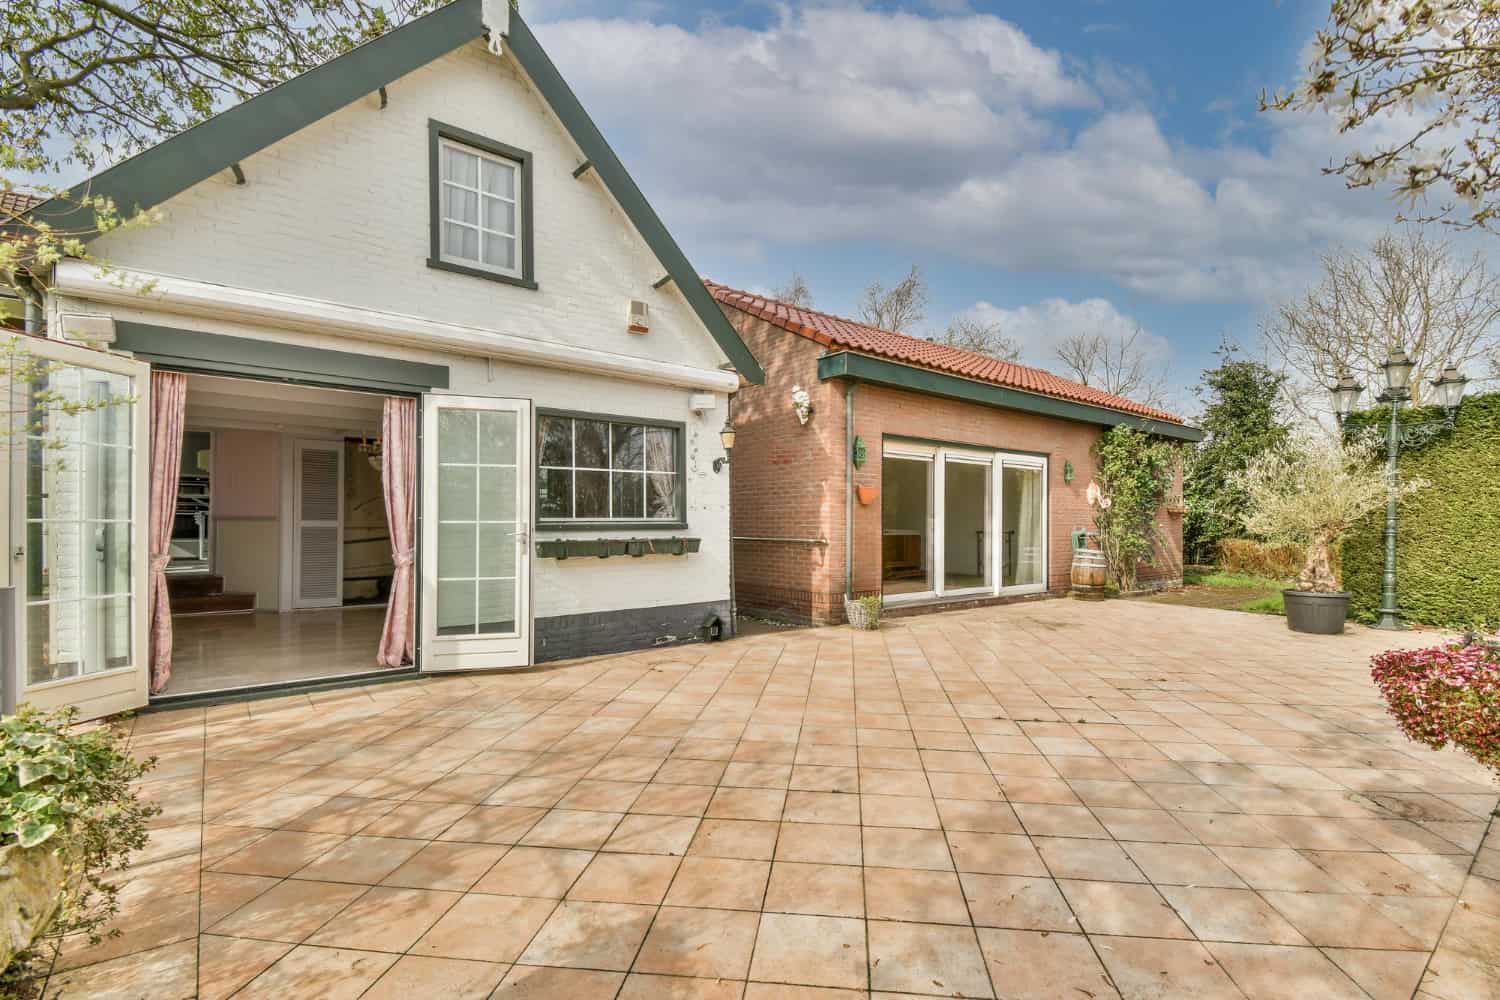 The back patios of two side by side white and tan brick homes; a white brick home has double French patio doors propped open. The second tan brick house has three panel sliding patio doors.